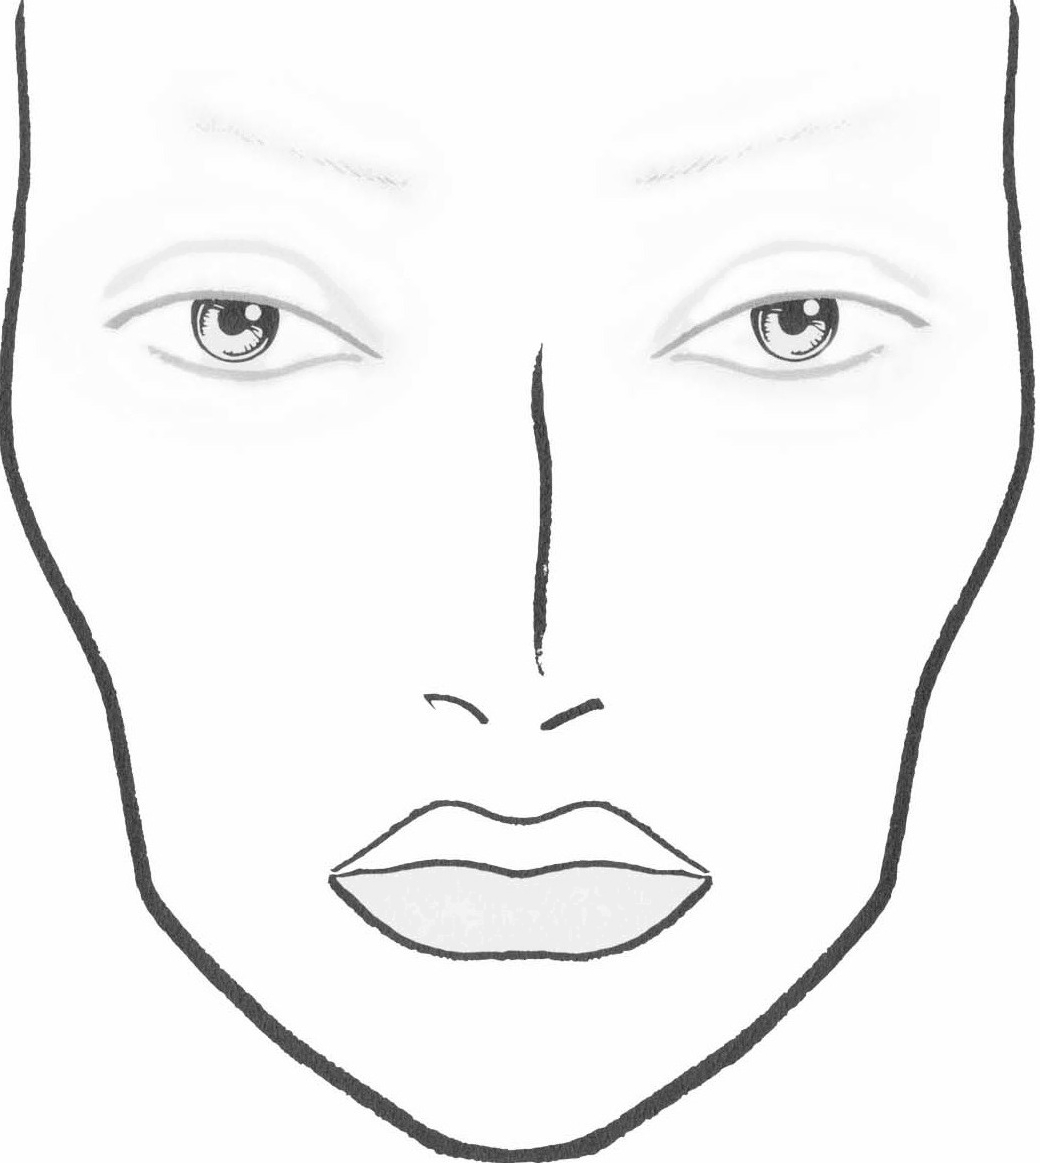 Blank Face Outline Cliparts.co